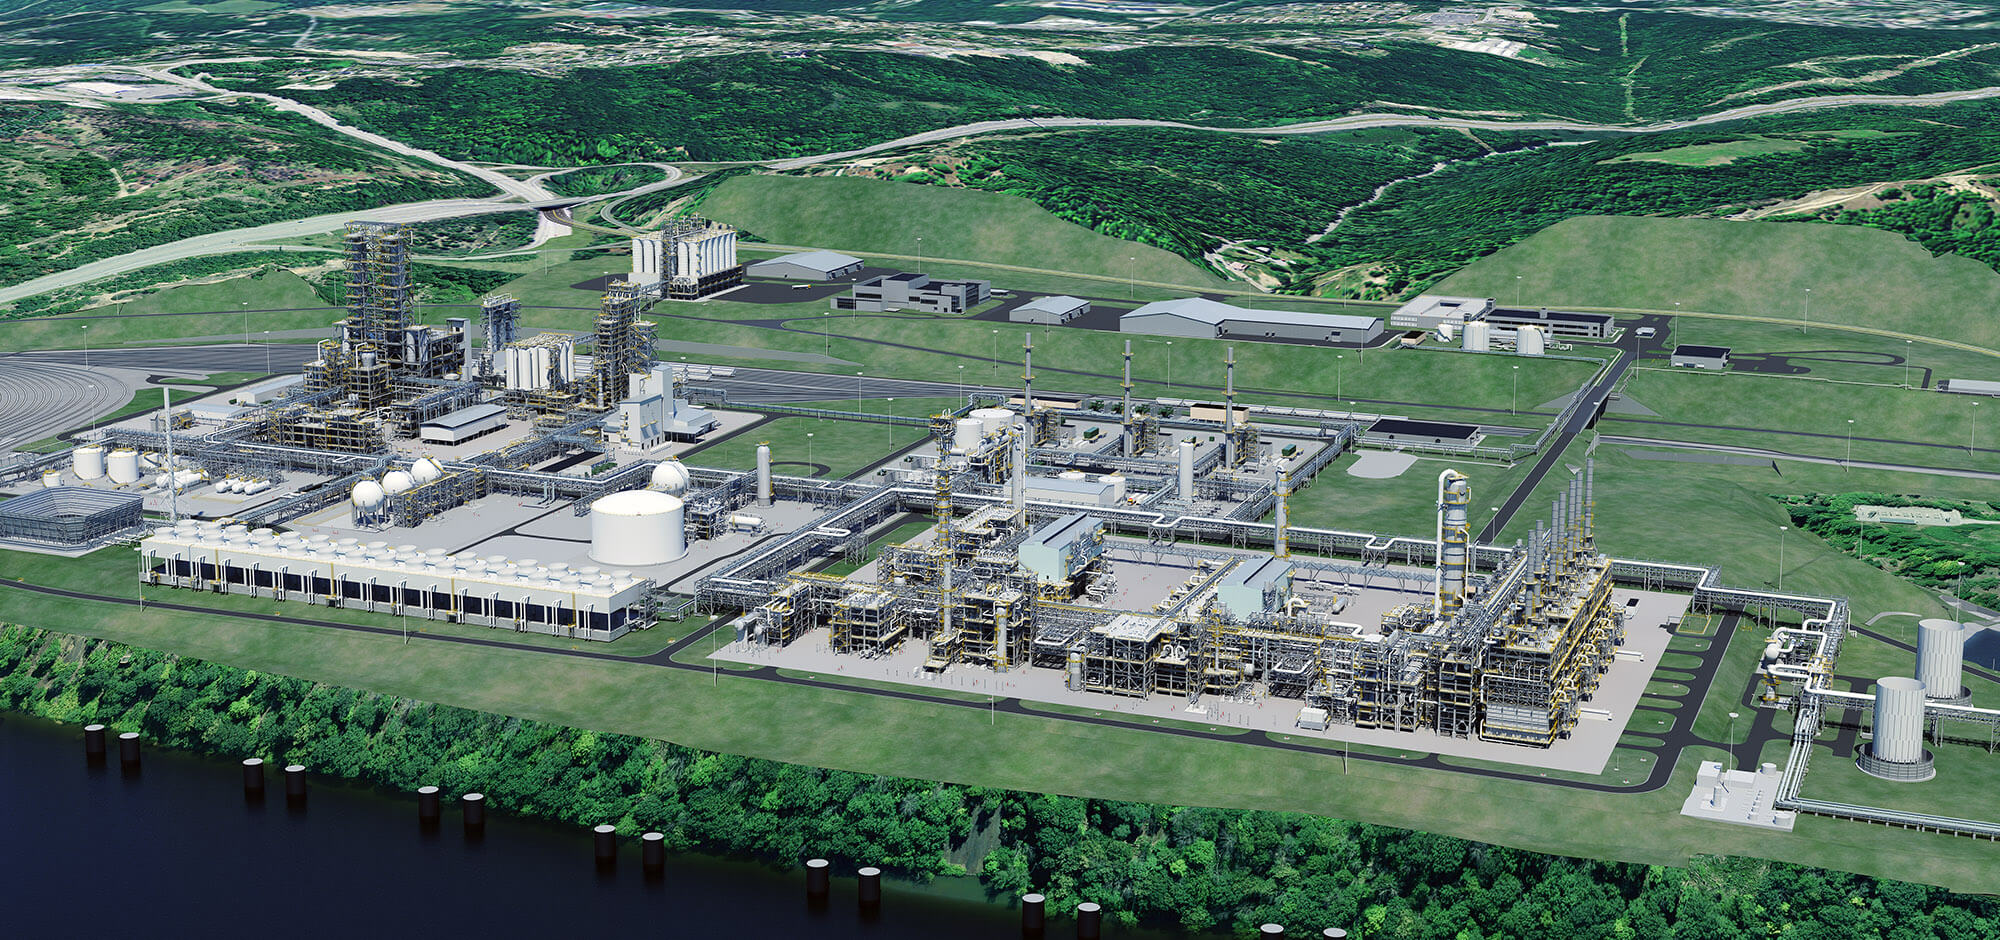 A digital render of a chemicals plant